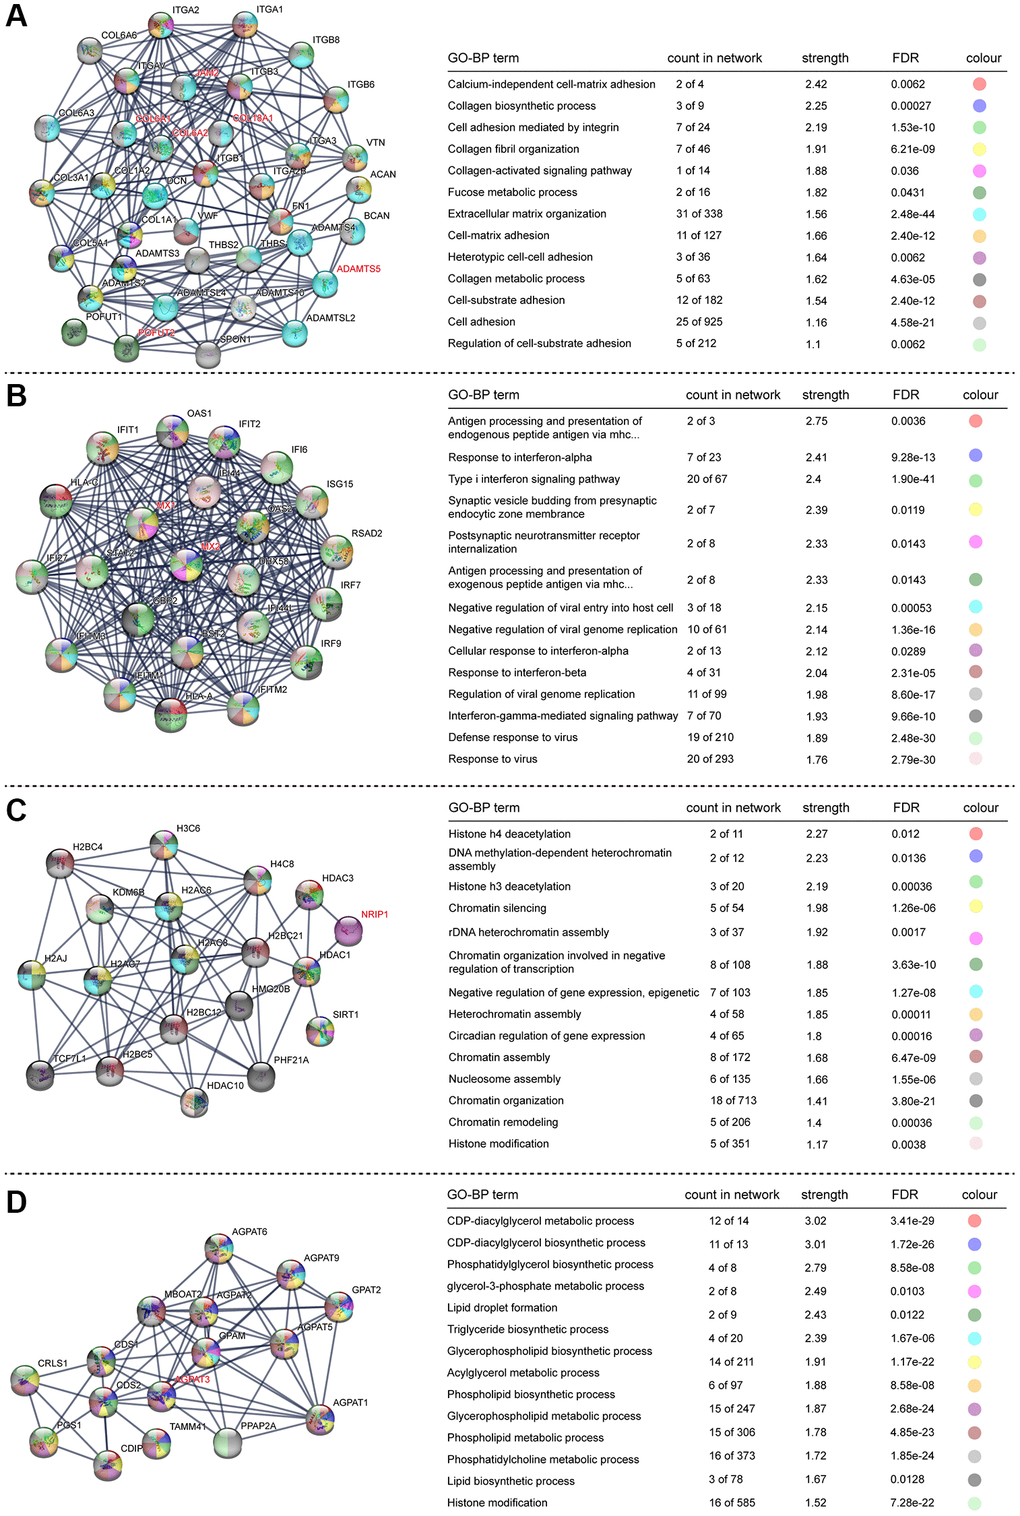 STRING protein network analysis of upregulated genes. (A–D) Different networks clustered in the upregulated genes. Dots indicate interacting proteins, and colours denote GO-BP terms enriched in each network. The HSA21-related genes are marked in red.